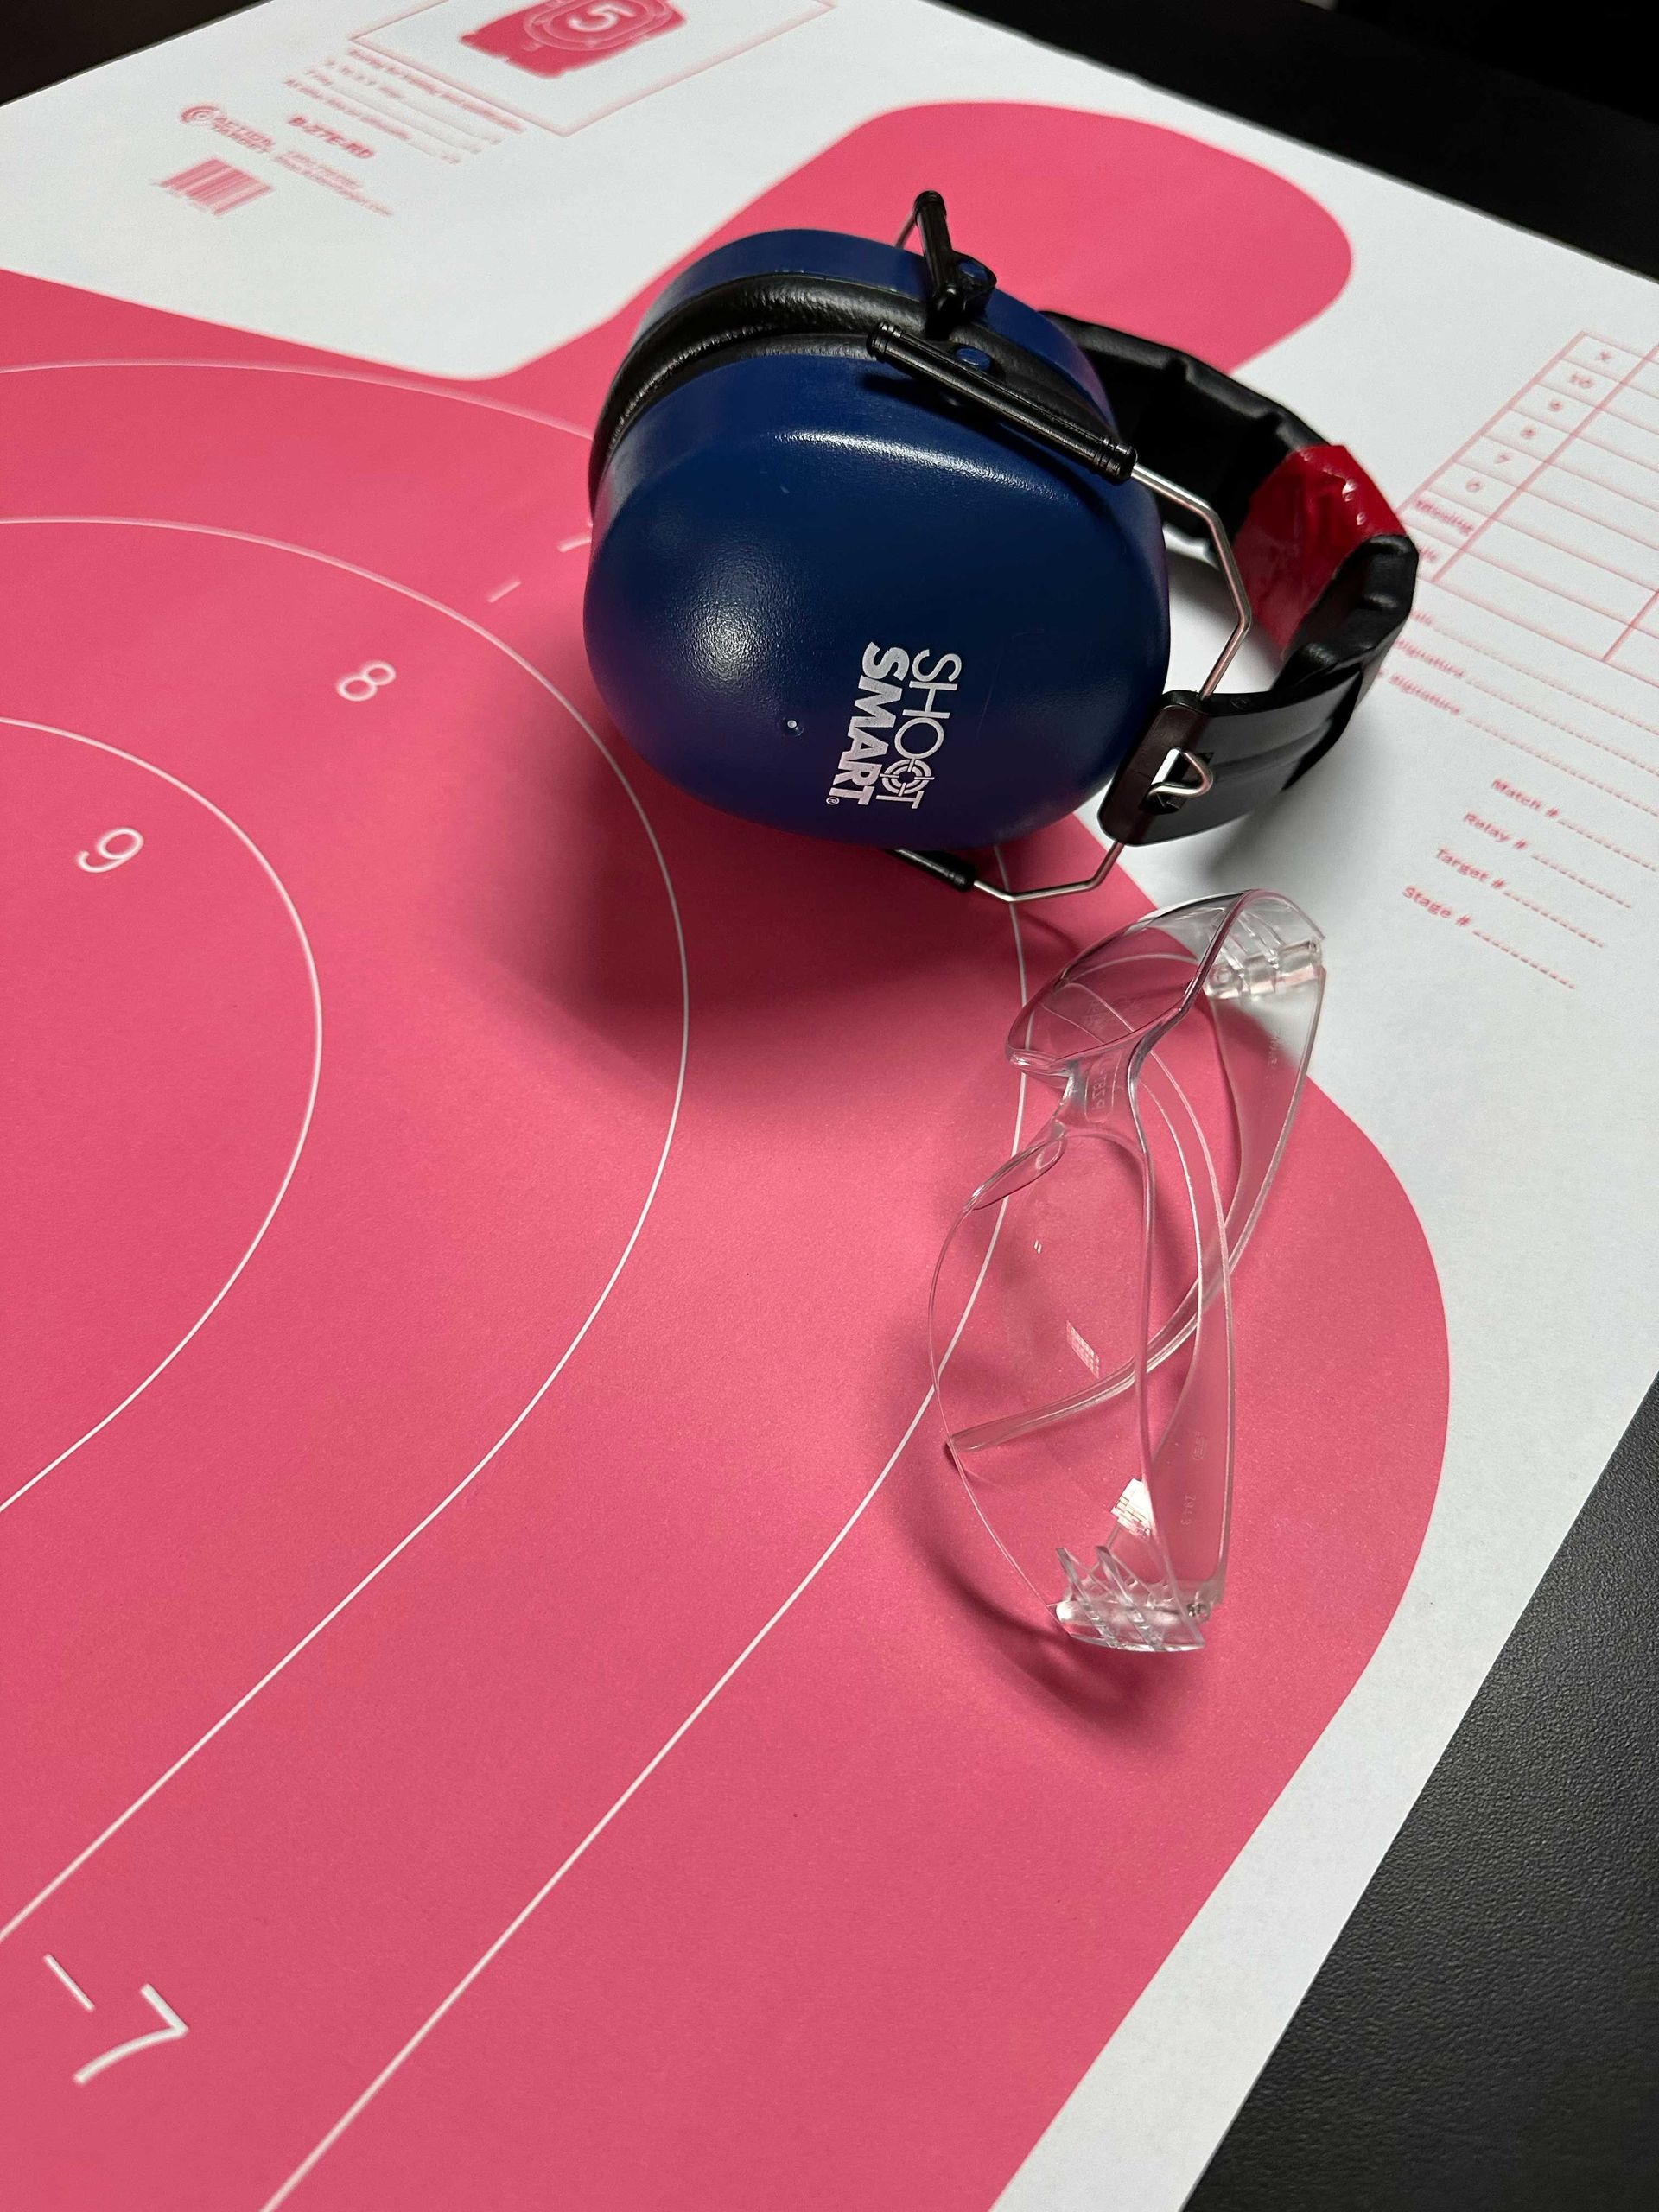 shooting target with ear and eye protection